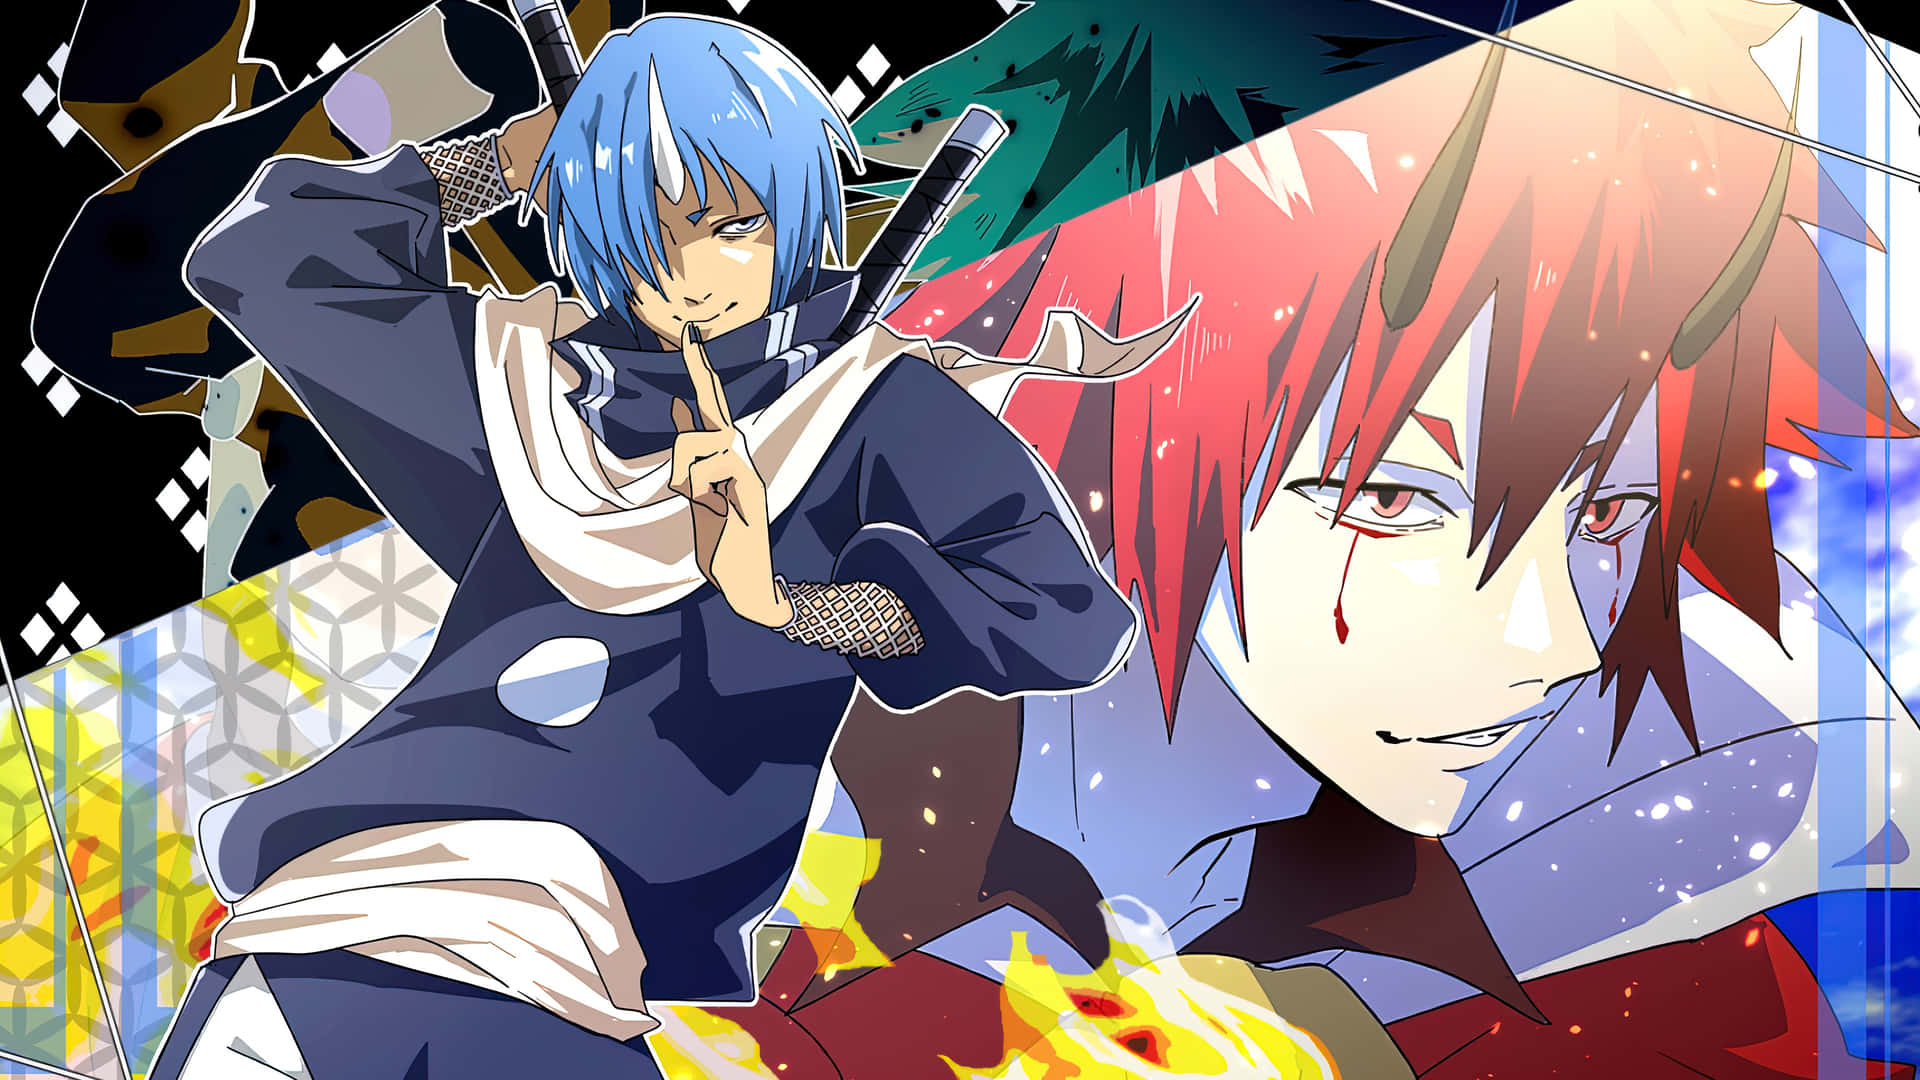 Anime That Time I Got Reincarnated as a Slime HD Wallpaper